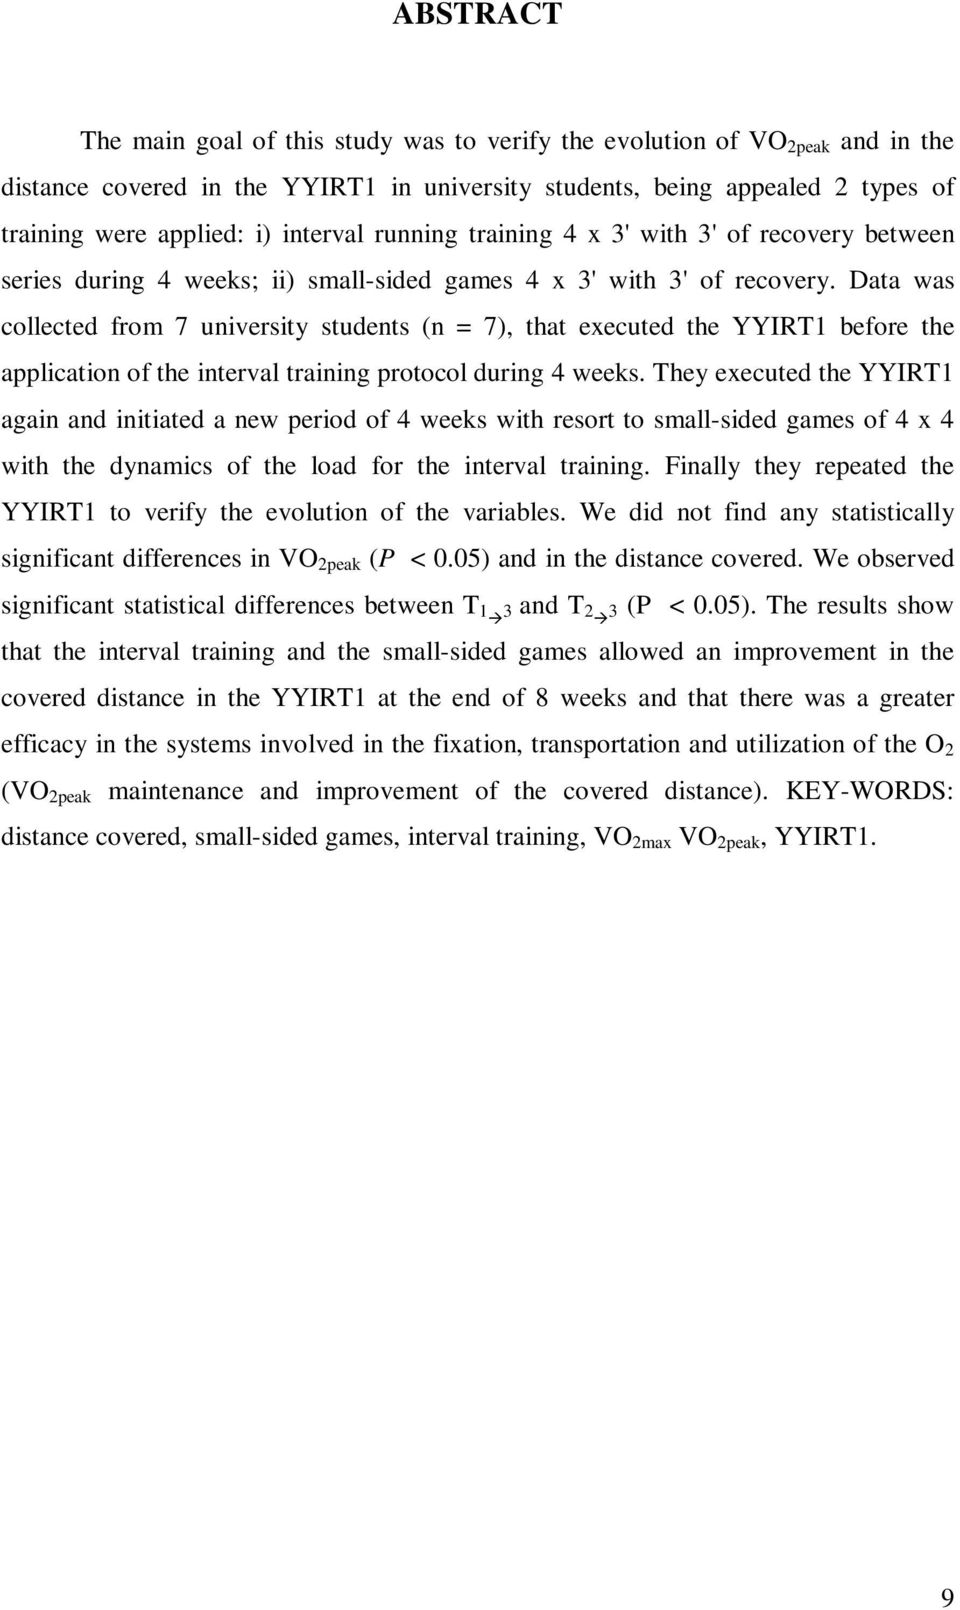 Data was collected from 7 university students (n = 7), that executed the YYIRT1 before the application of the interval training protocol during 4 weeks.